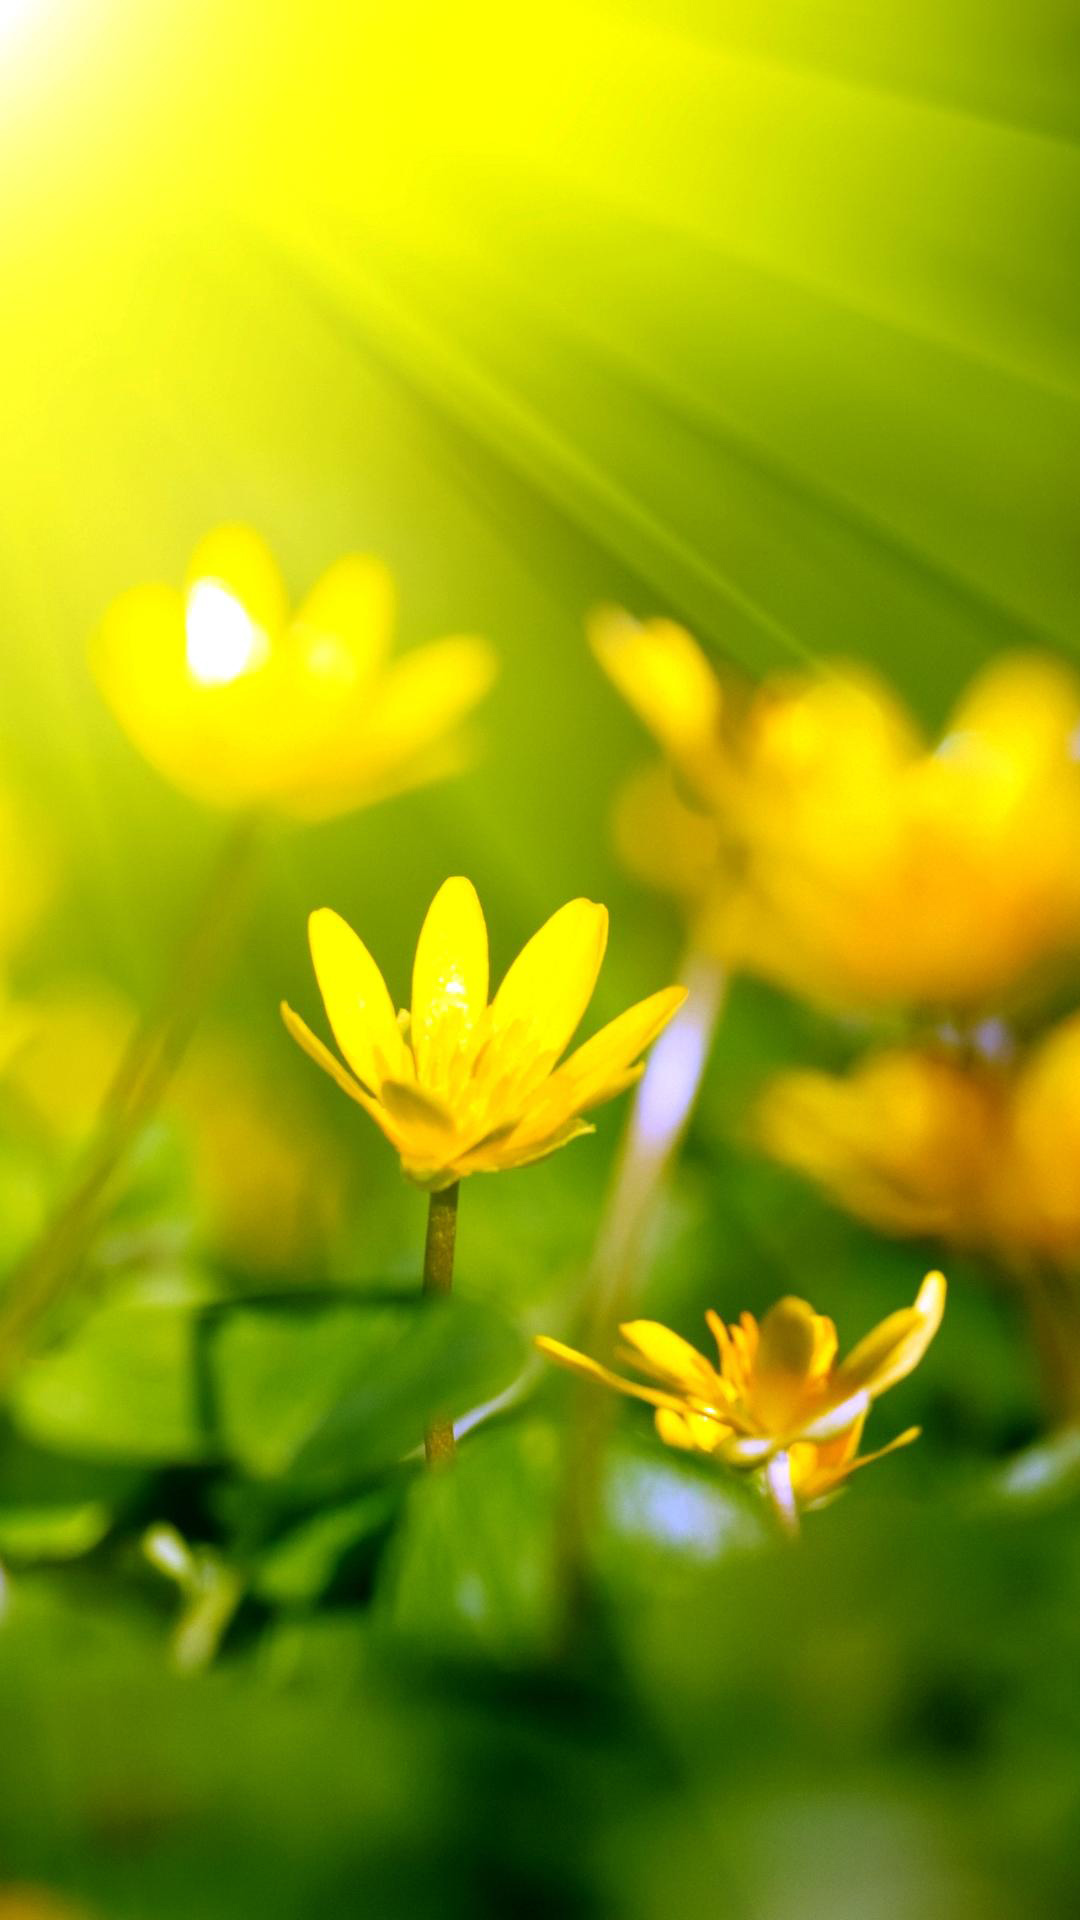 Yellow Flower For Sony Xperia Z2 Wallpaper Android